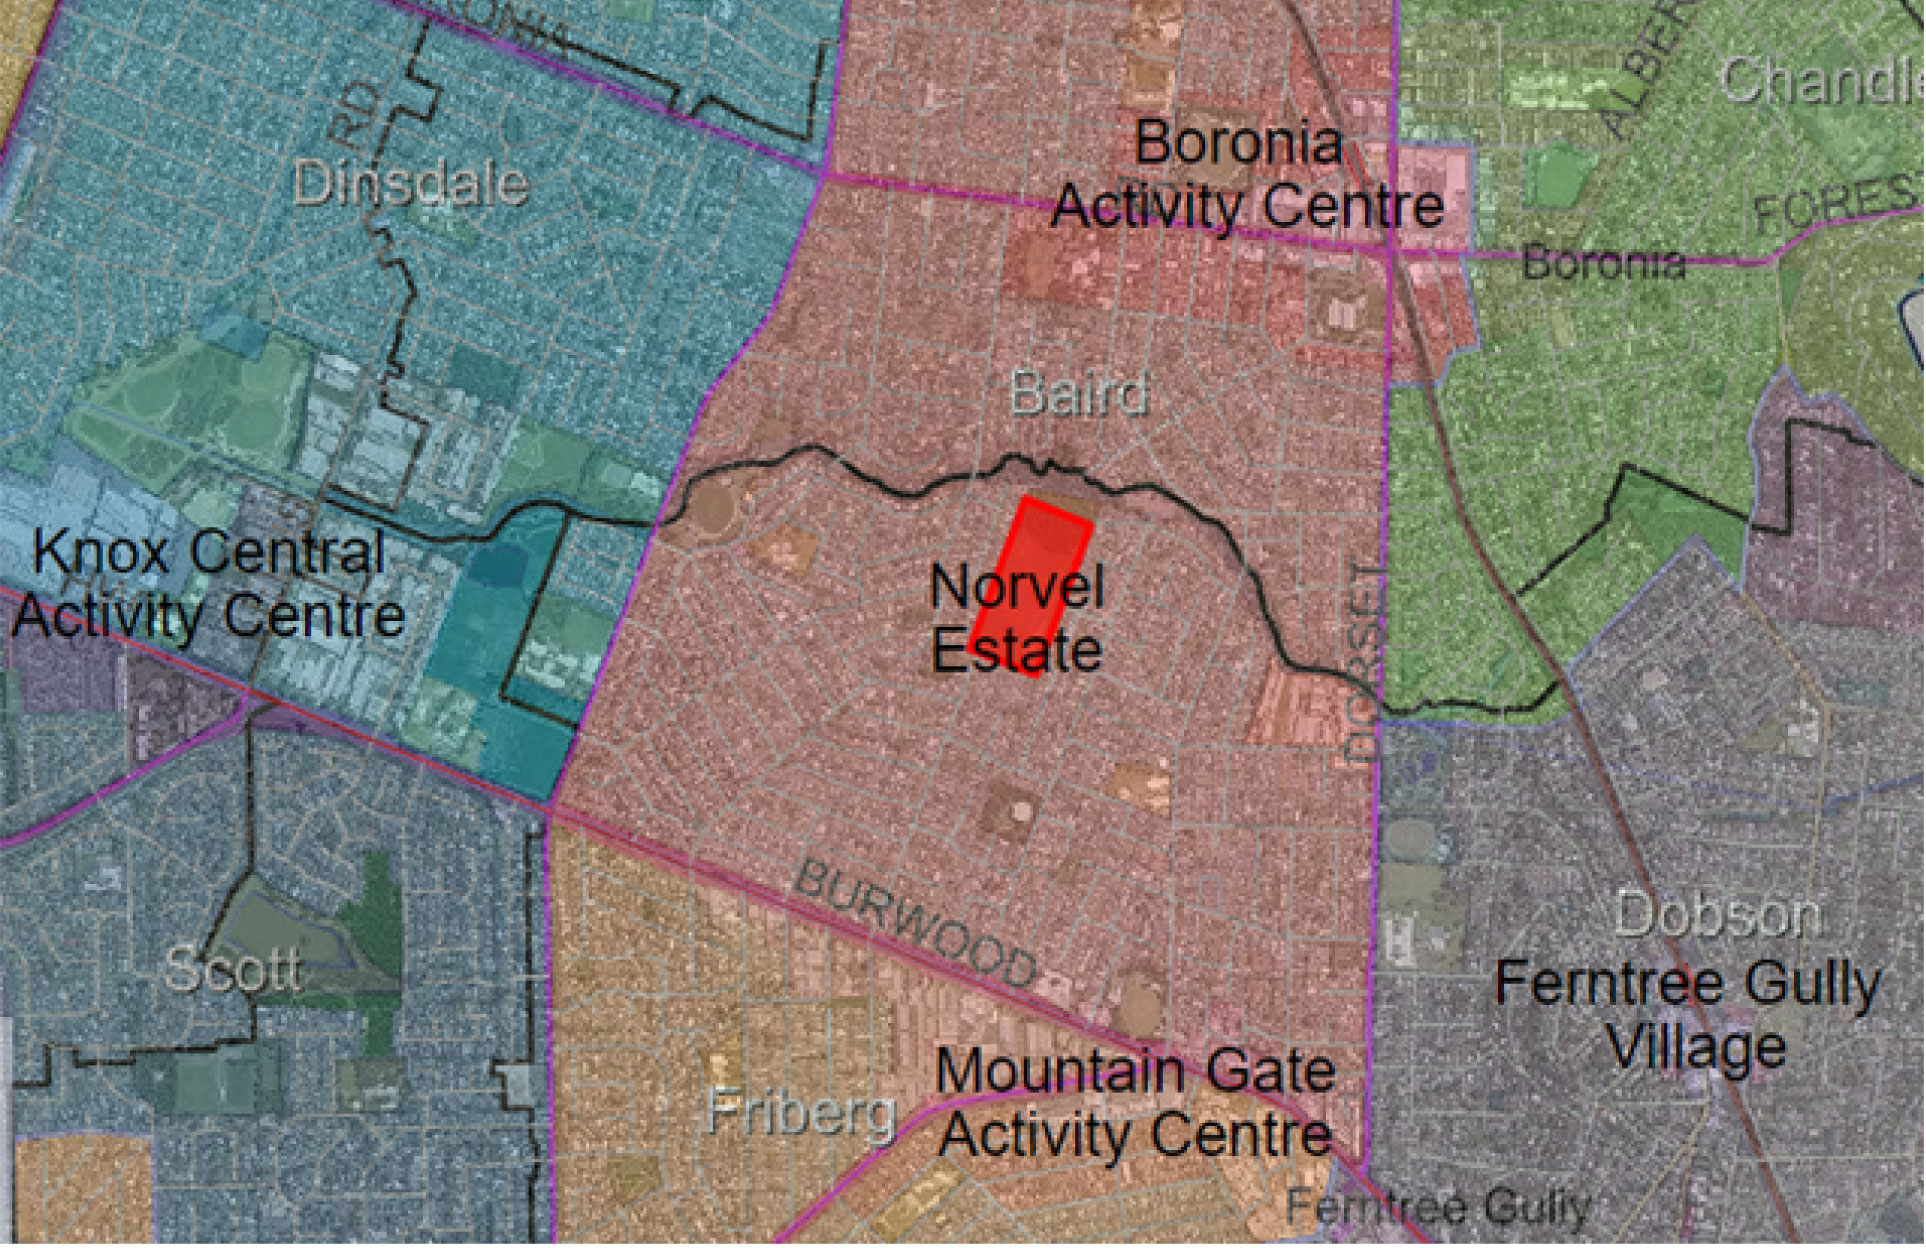 Map of Norvel Estate in Ferntree Gully